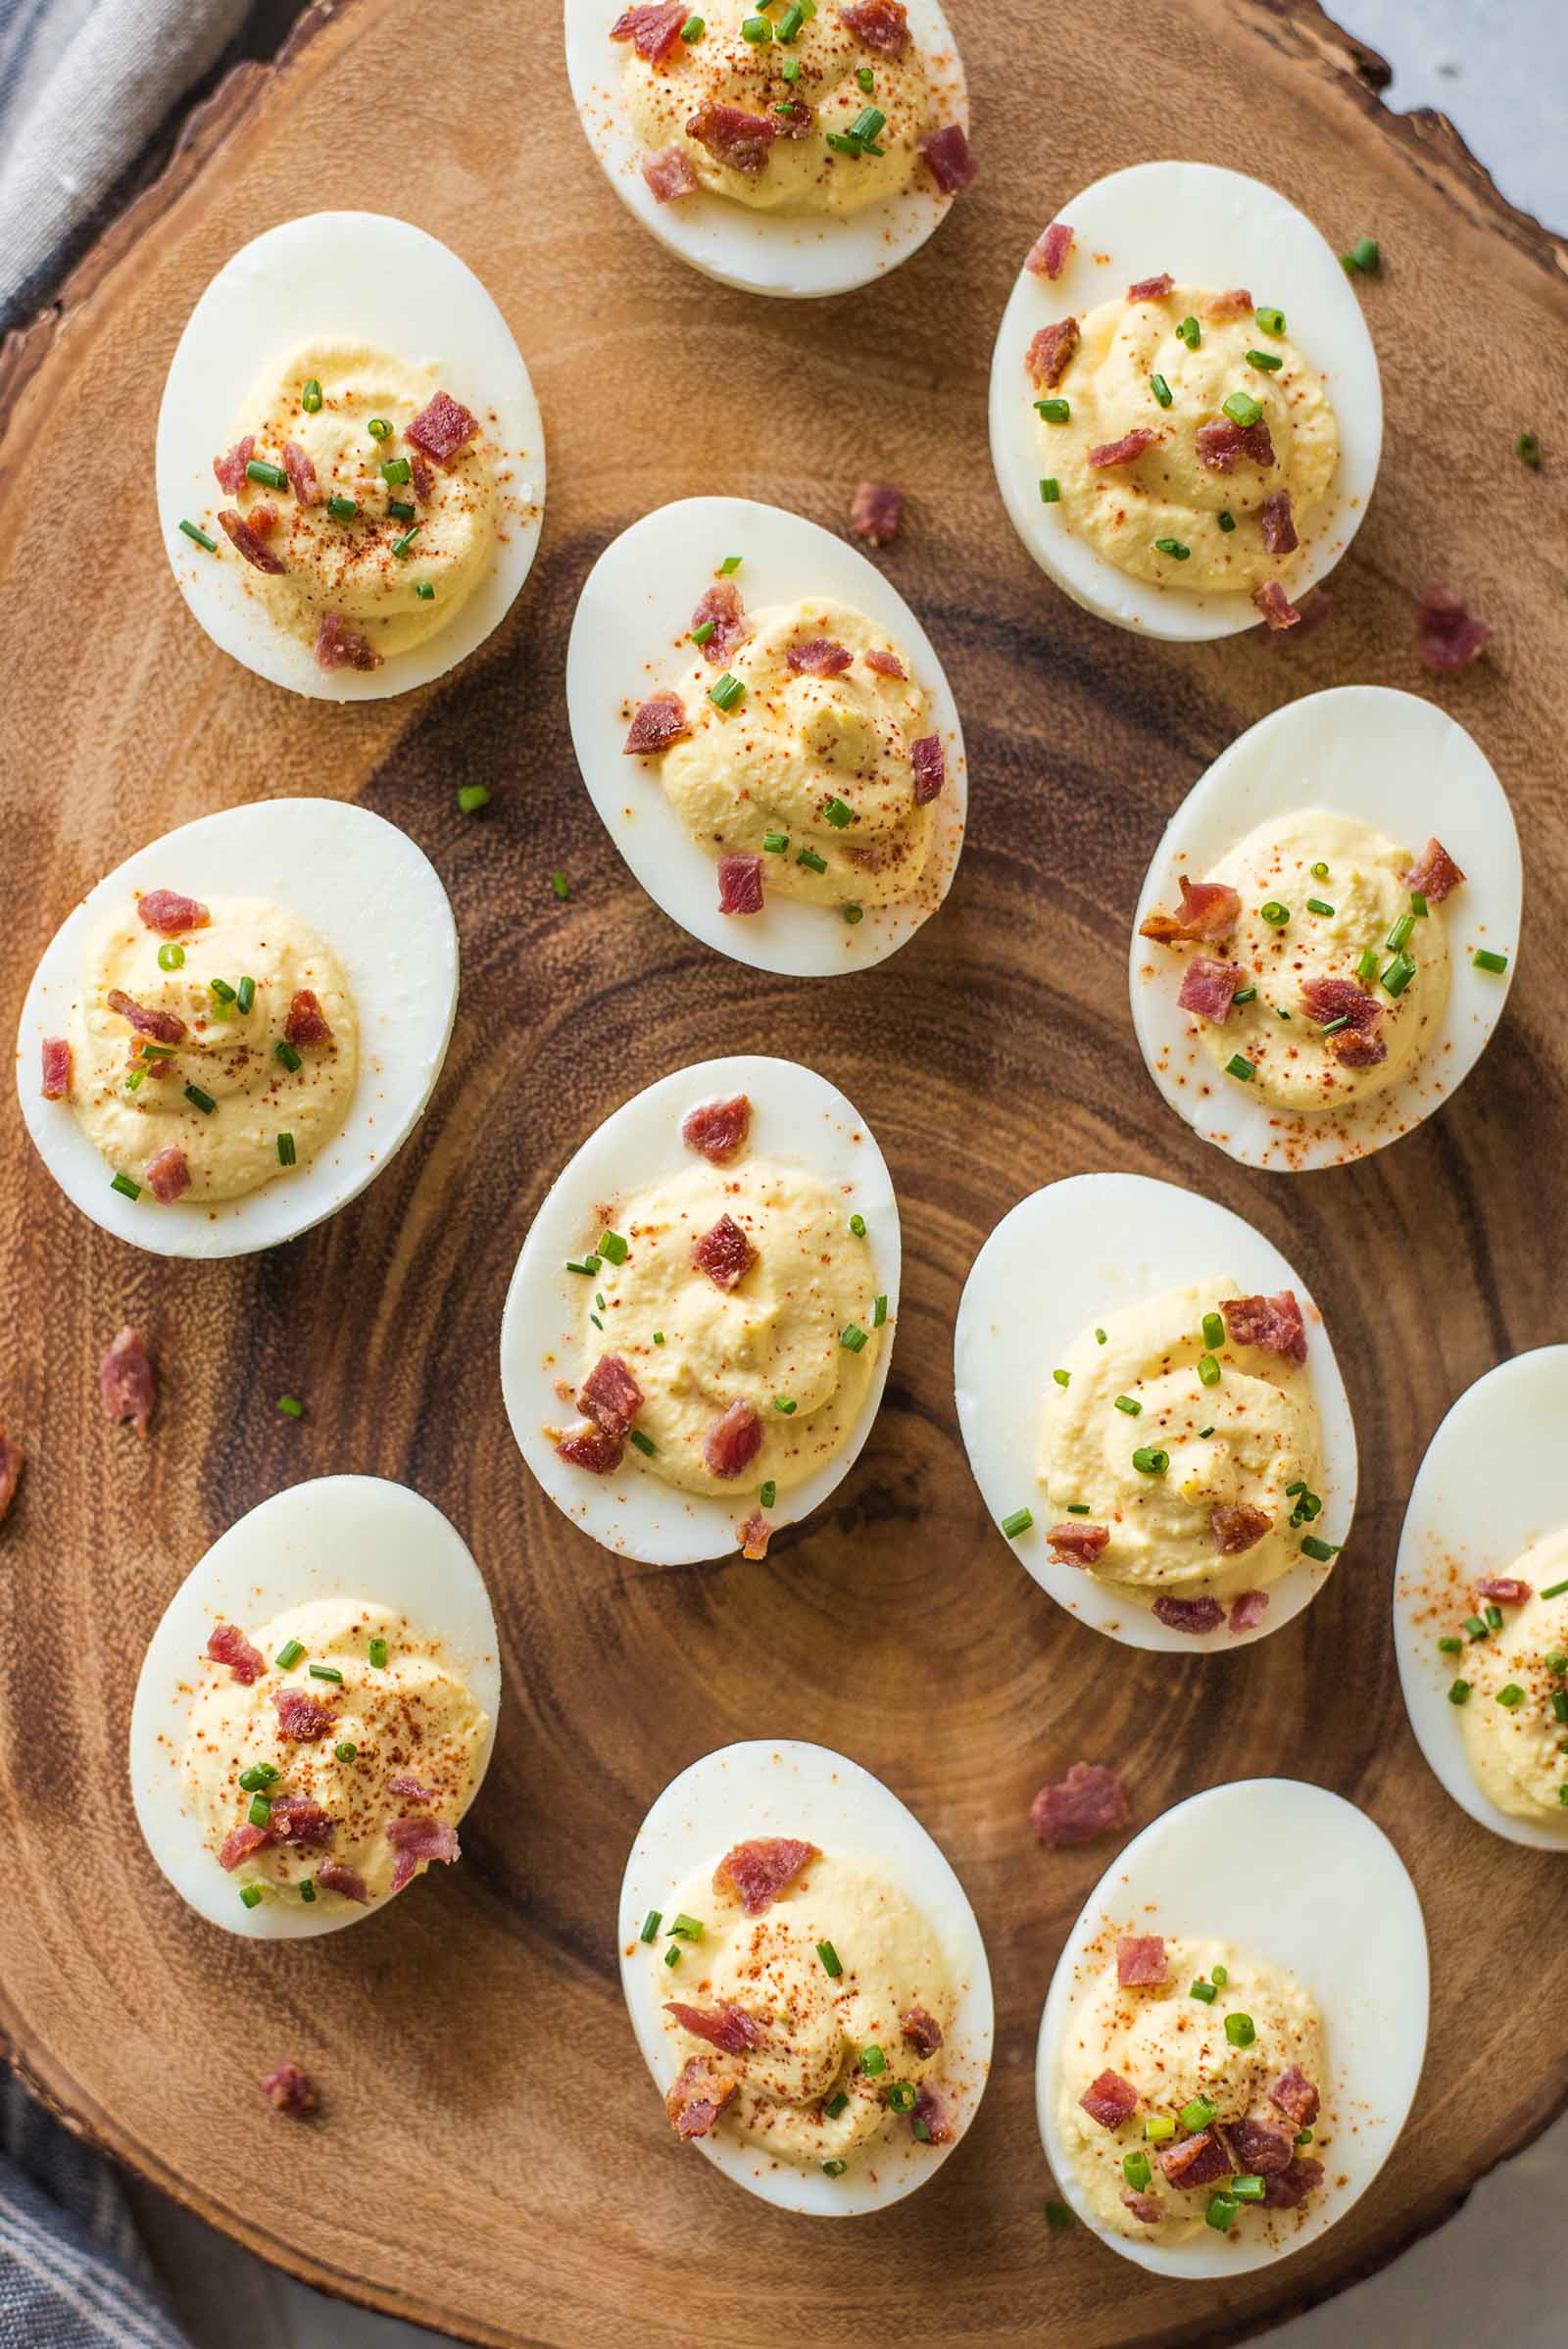 SOUR CREAM AND BACON DEVILED EGGS